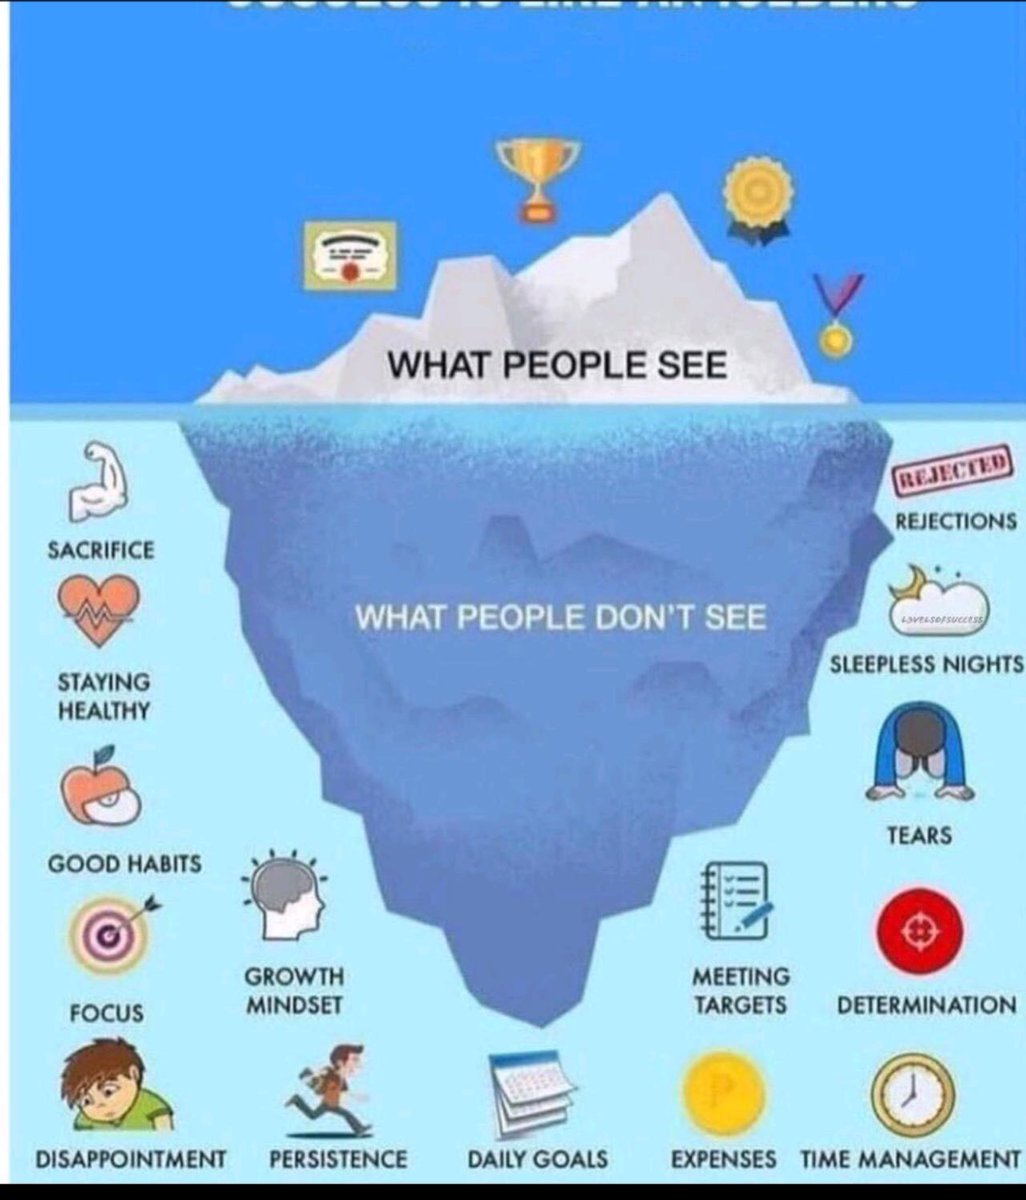 There is so much more to success (and failure) that meets the eye!

#LifeAtCP #PerksAtWork #Recruitment #Recruiters #SydneyRecruitment #SydneyRecruiters